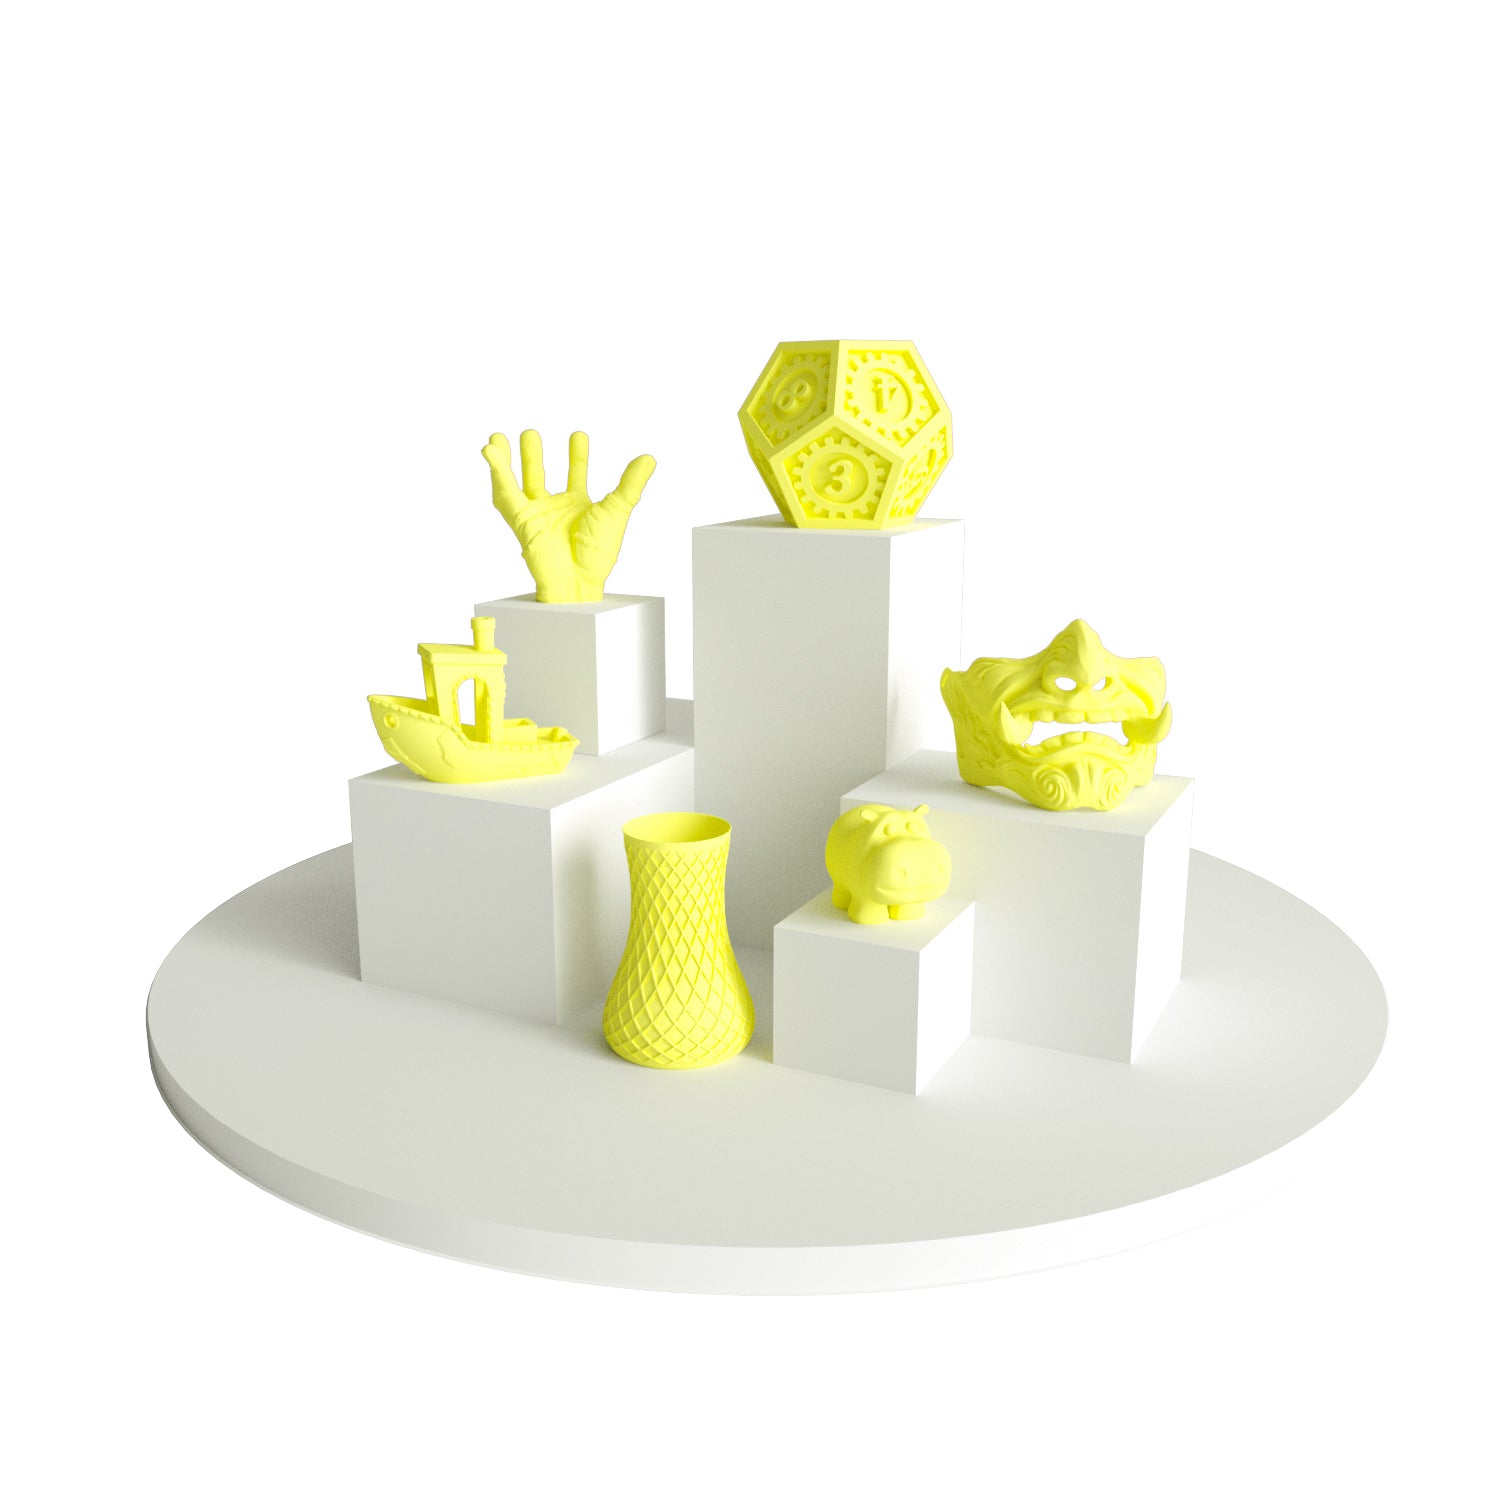 Gallery of 3D printed models with yellow PLA Matte 